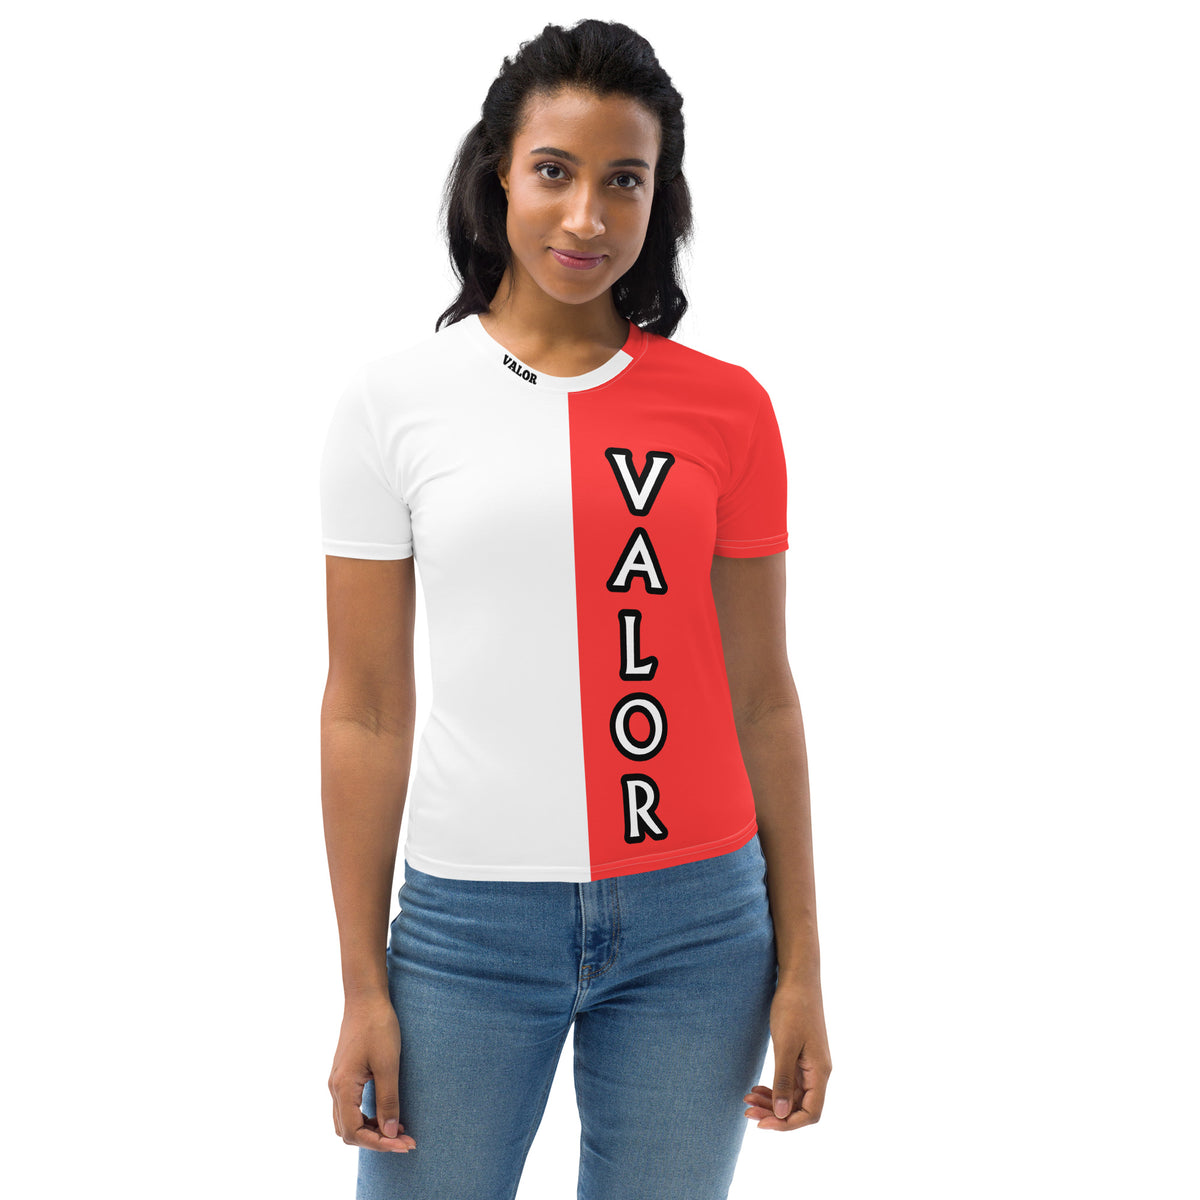 The VALOR Shirt, Red, Women's Fit